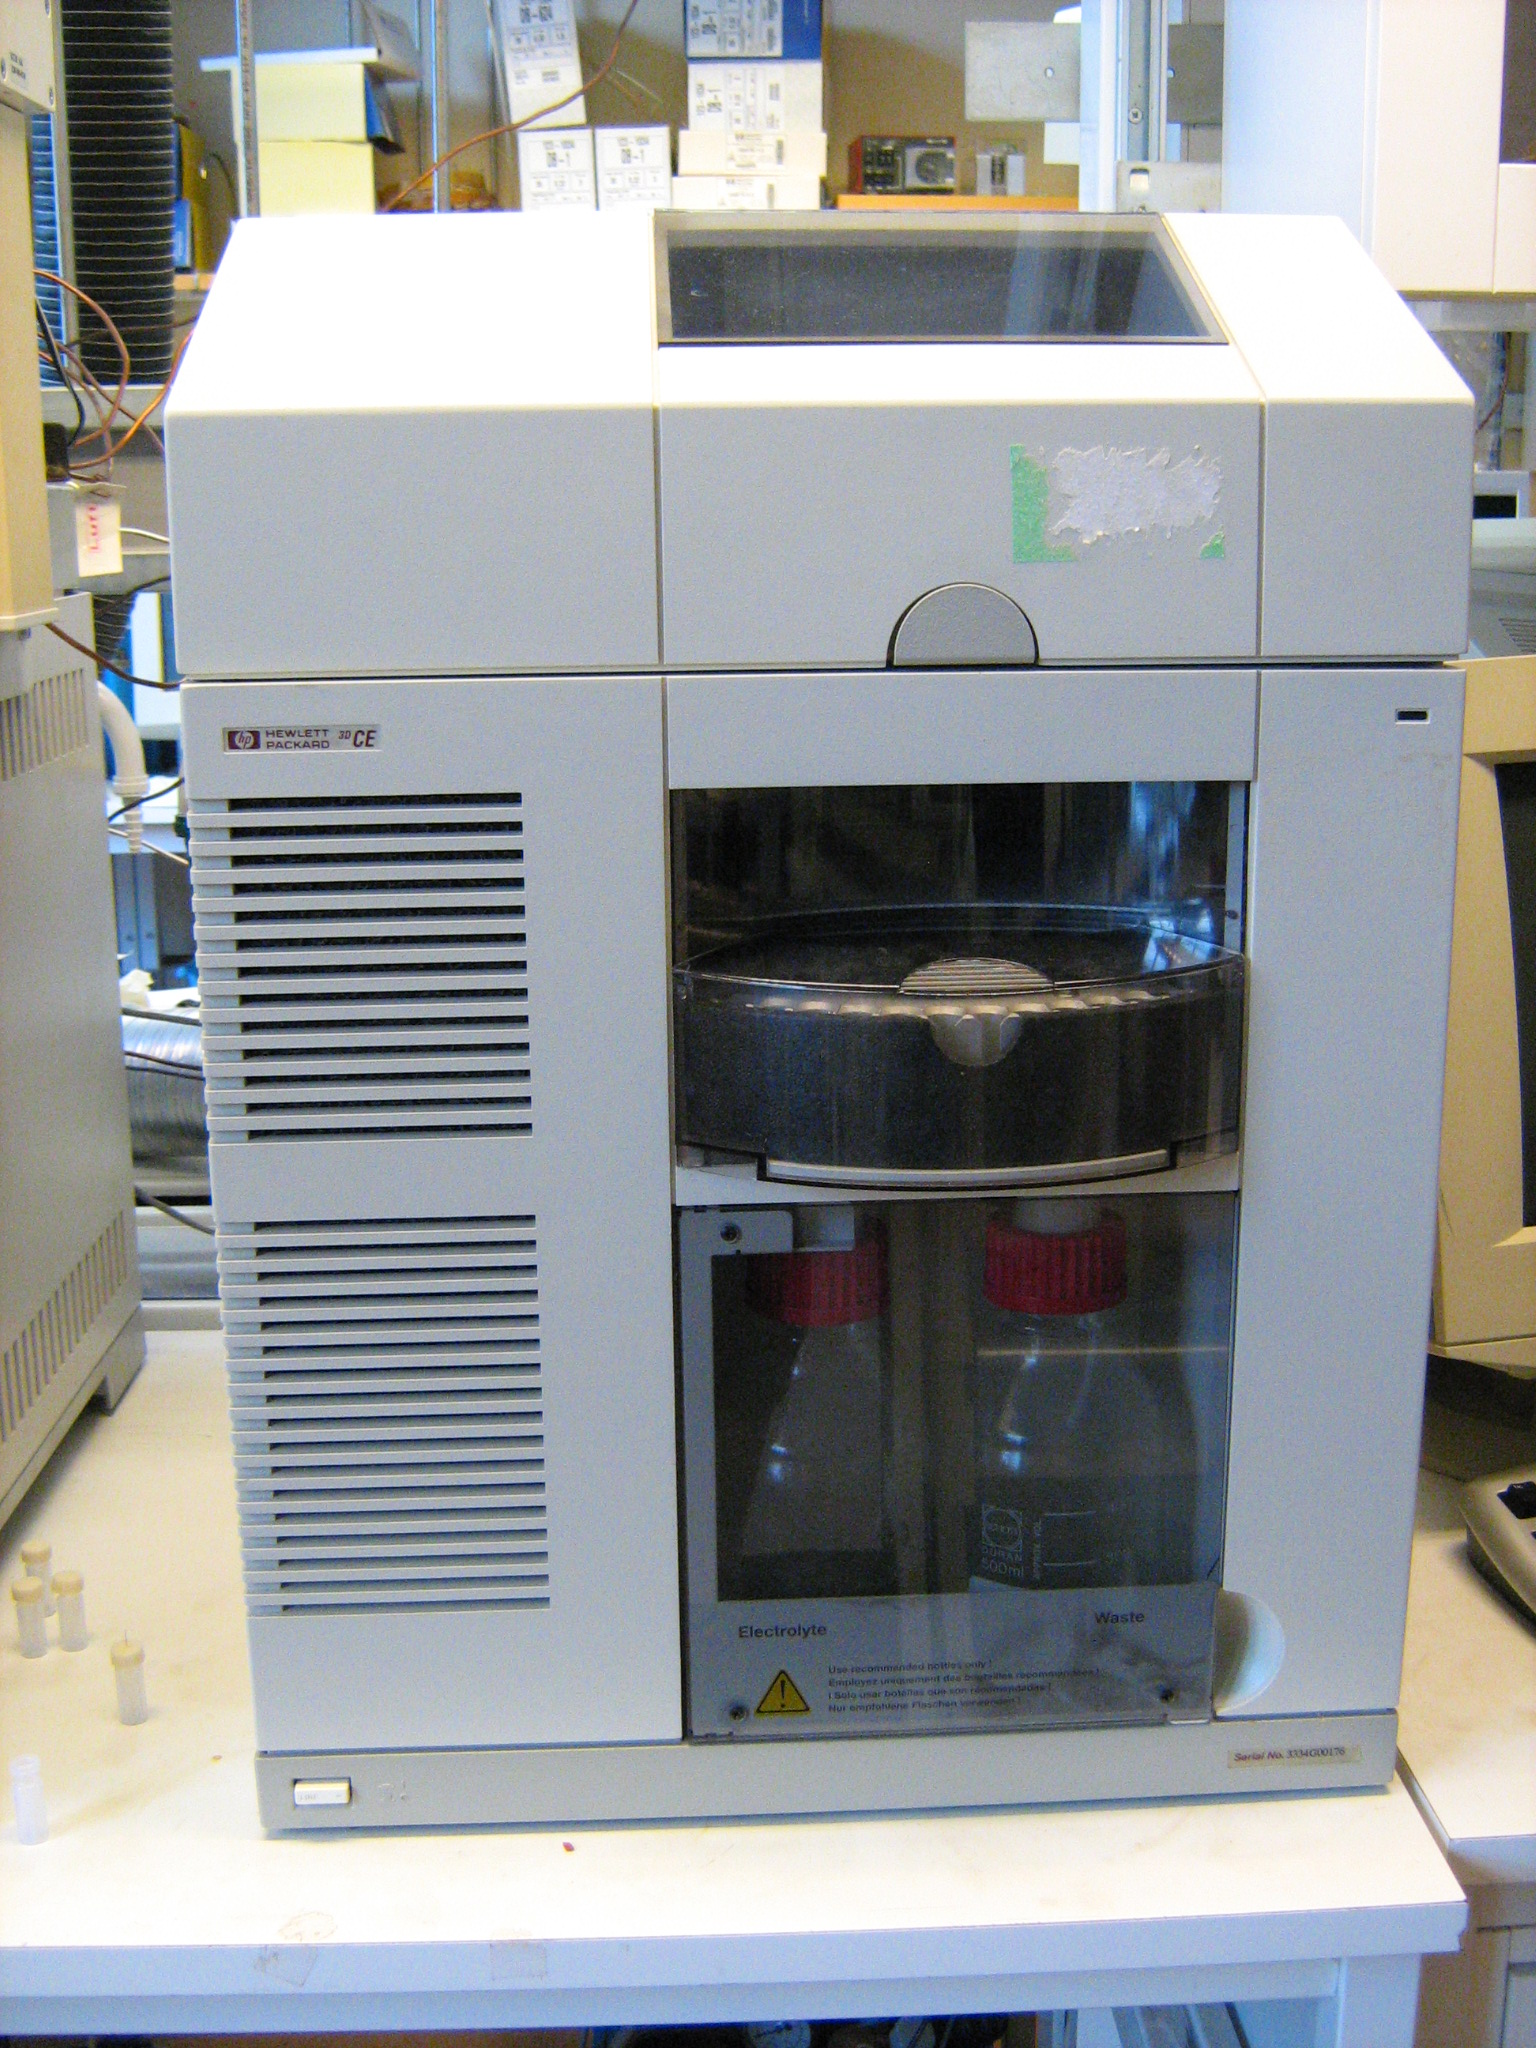 Picture of Capillary electrophoresis instrument